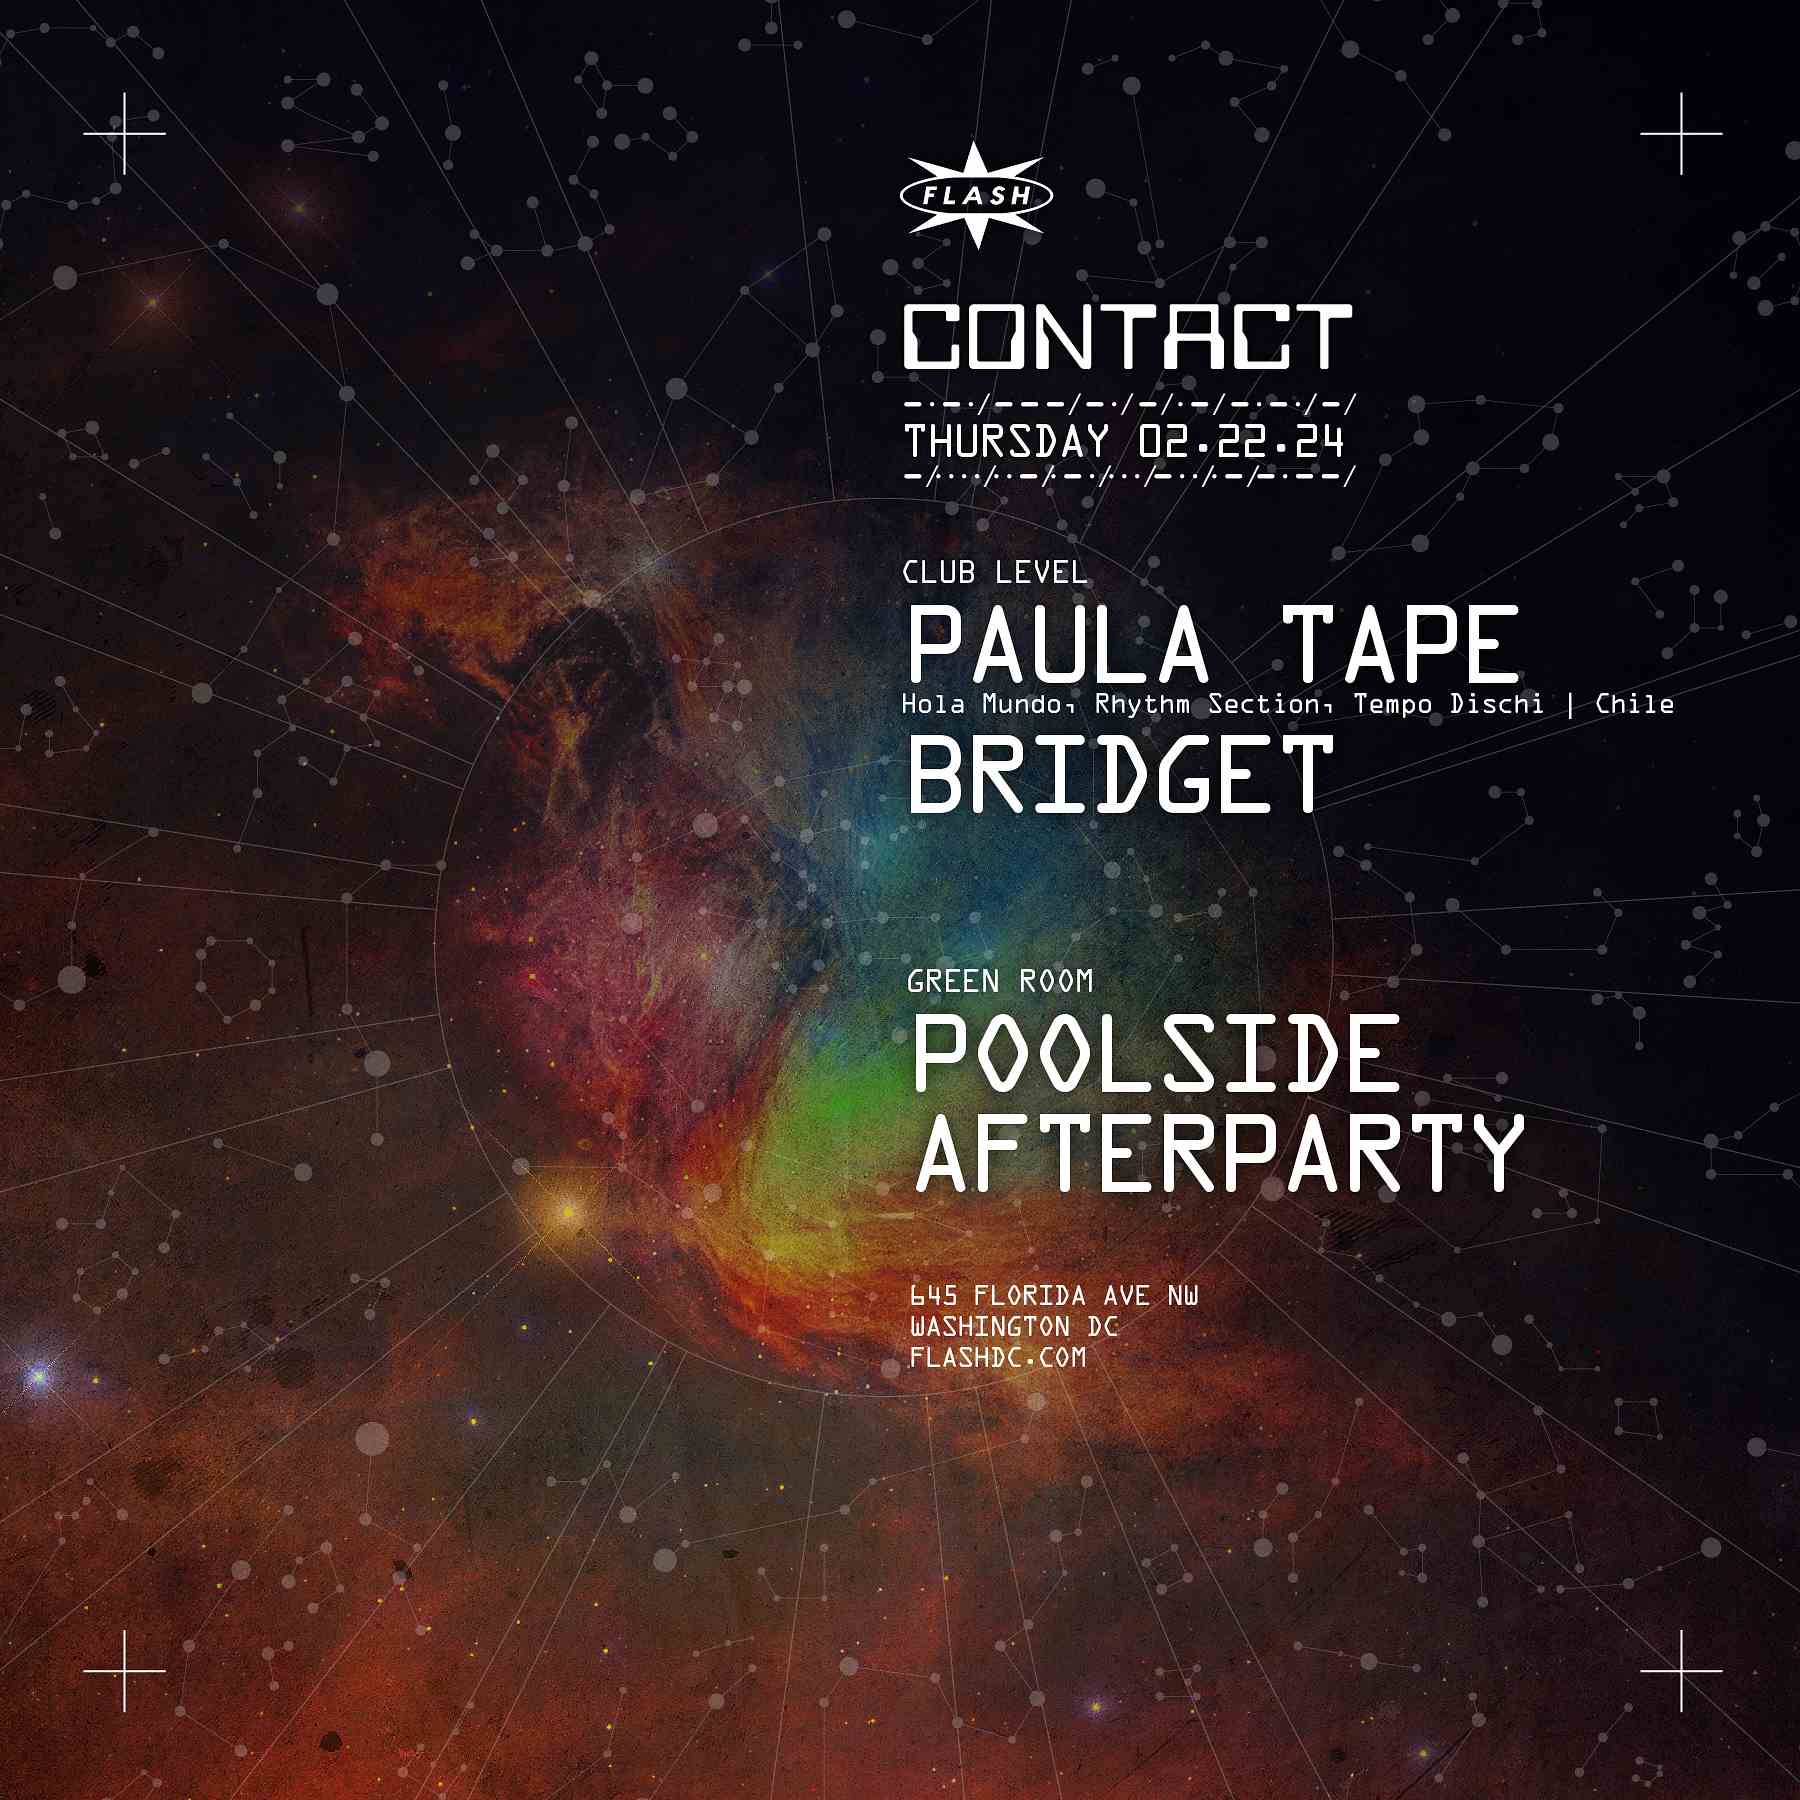 CONTACT: Paula Tape - Poolside Afterparty event flyer